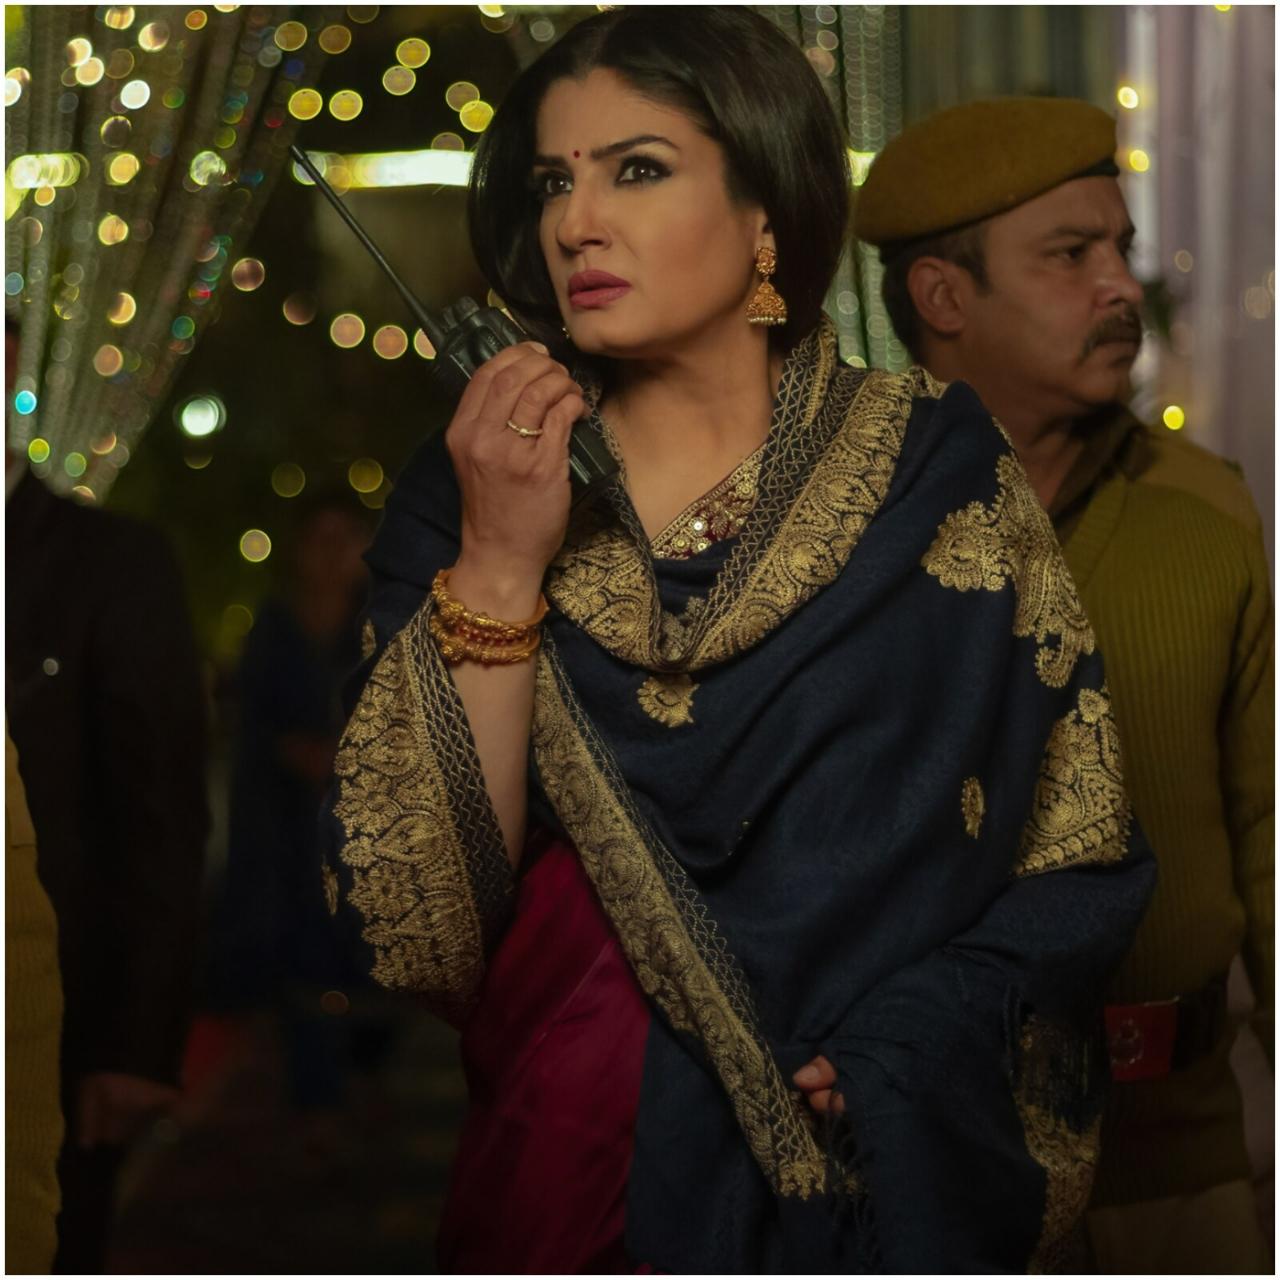 In this intense and action-oriented role, Raveena plays a dangerous balancing act between her familial and professional duties – and keeps audiences on the edge!